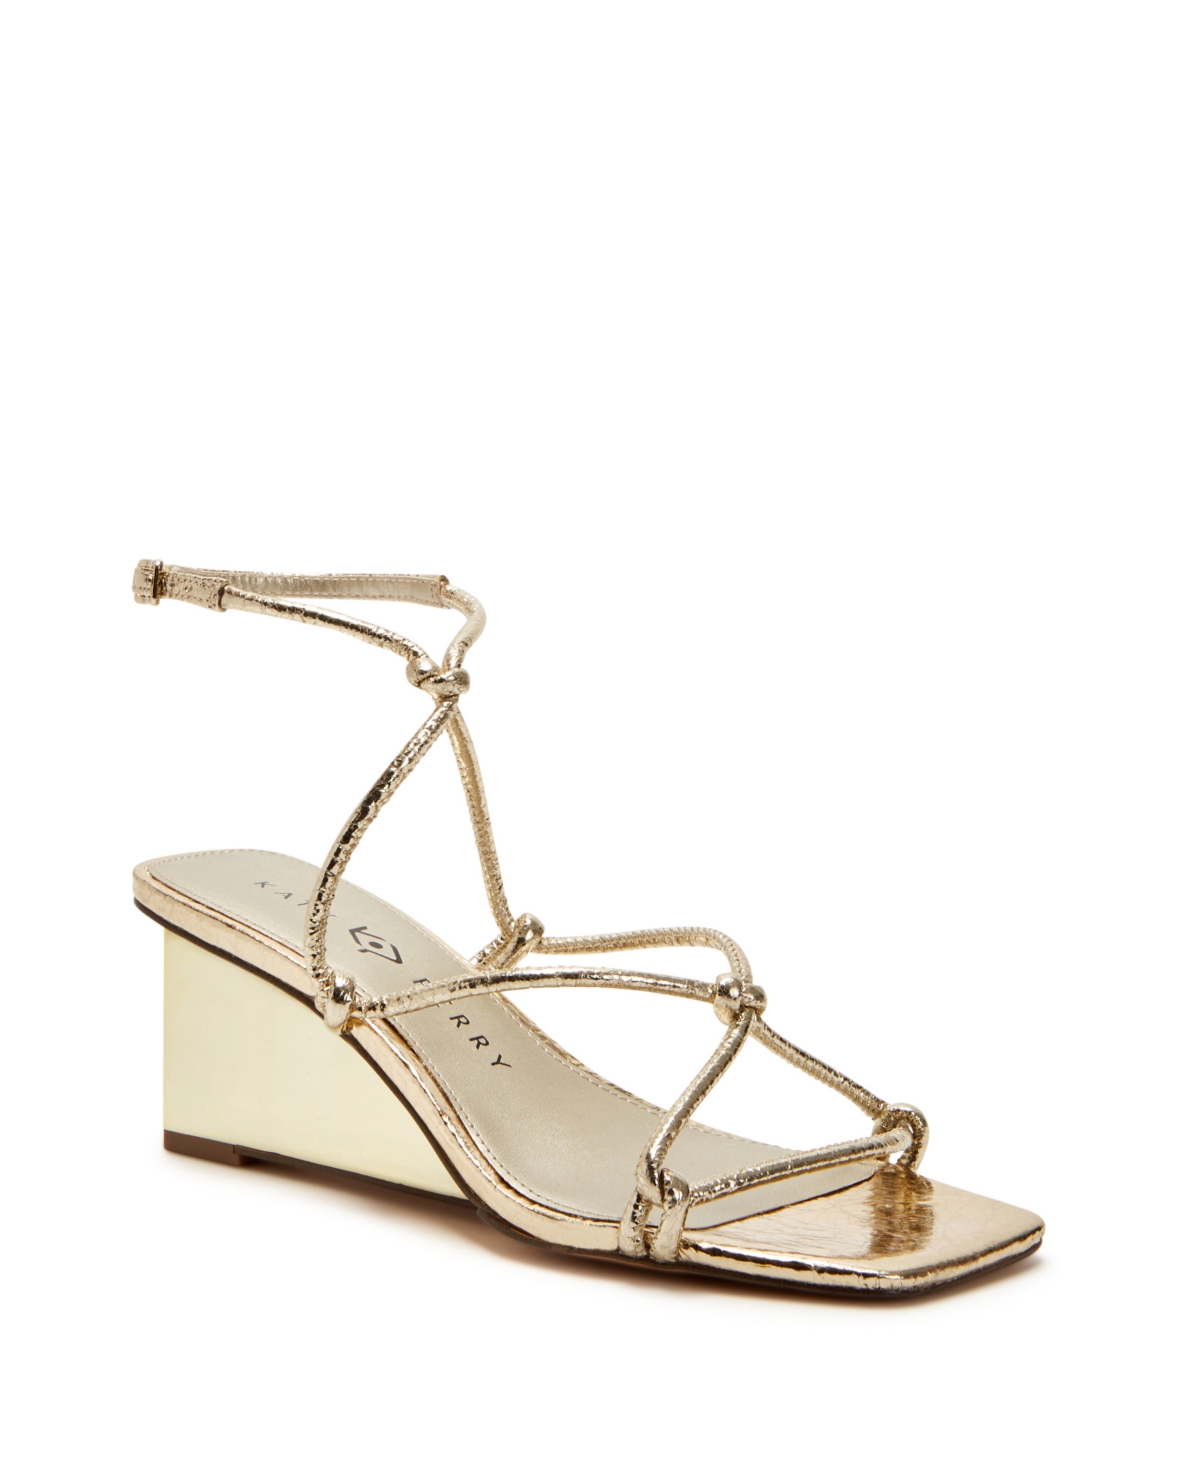 KATY PERRY WOMEN'S THE IRISIA STRAPPY BUCKLE SANDALS